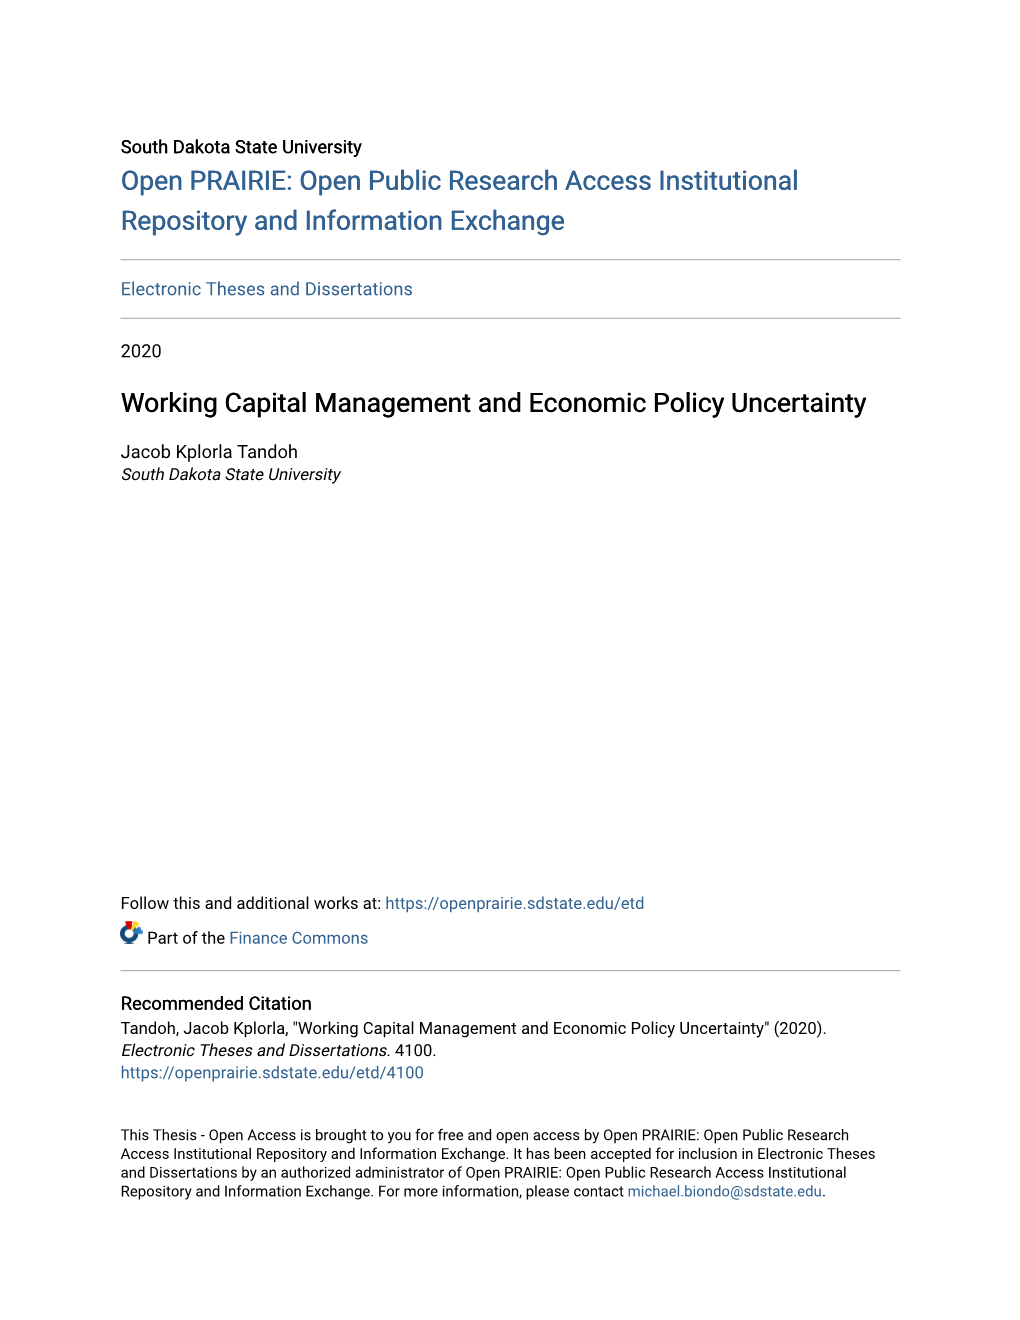 Working Capital Management and Economic Policy Uncertainty